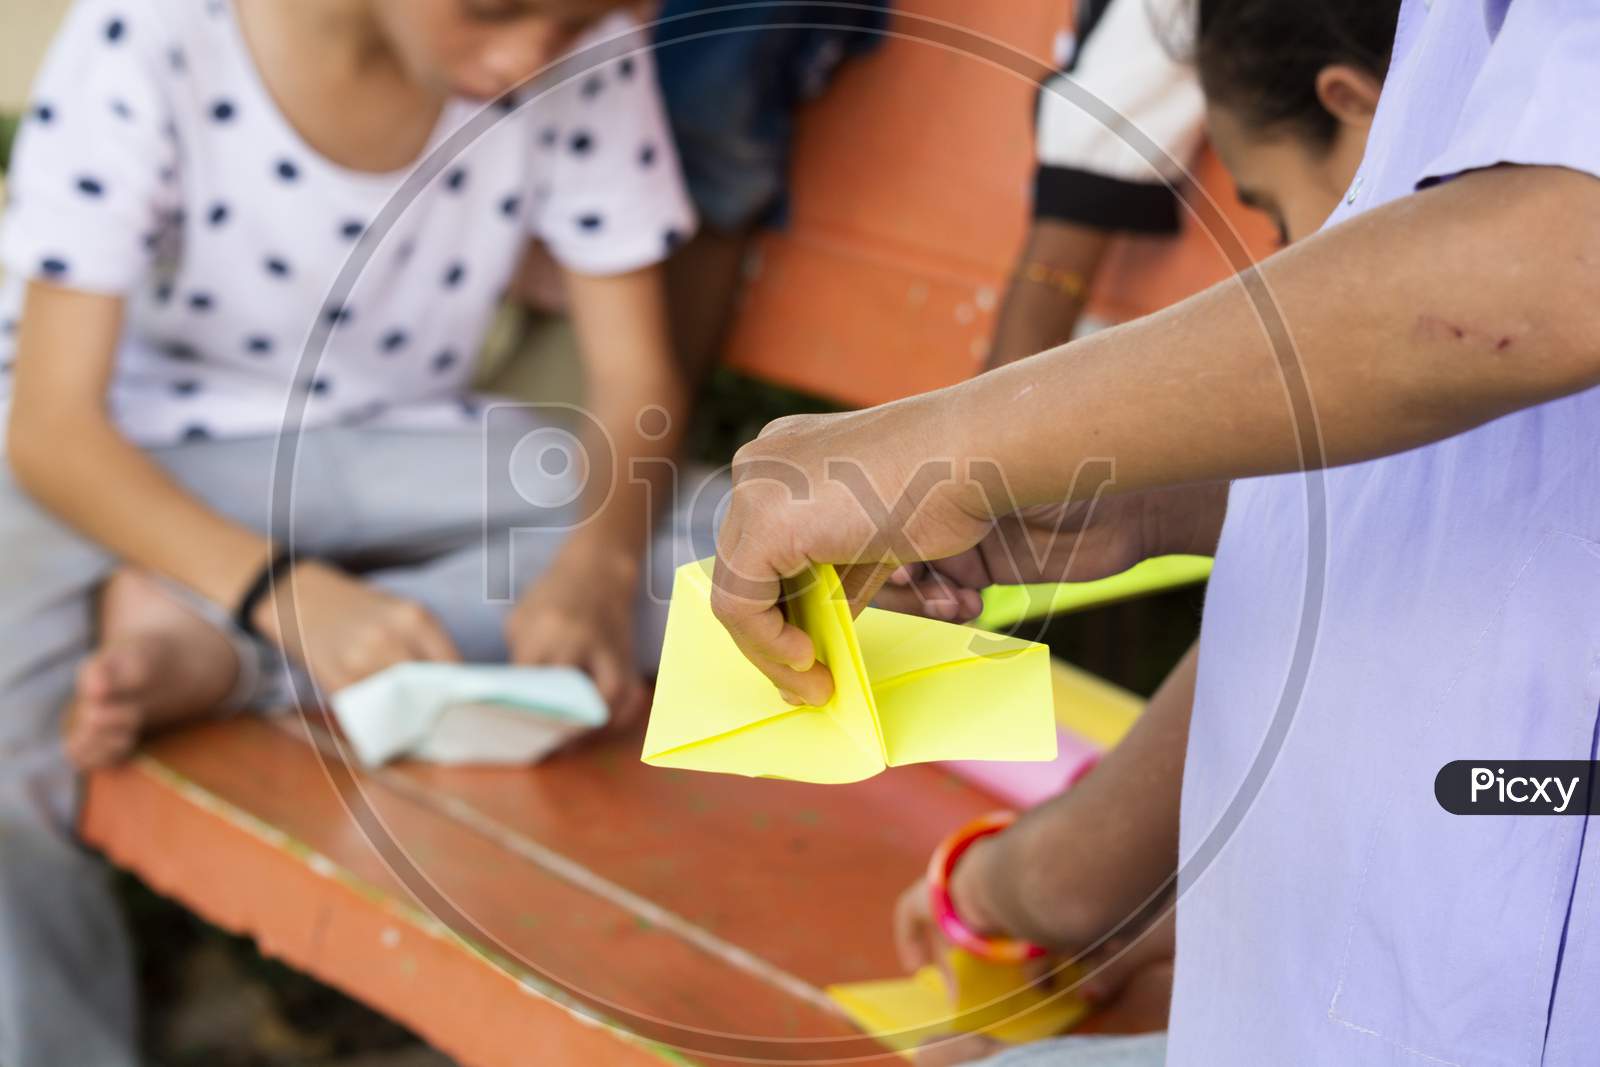 Children's Making Paper Rocks to Play Paper Rockets Game At a Park, Outdoors - Kids Playing Outside During Leisure.